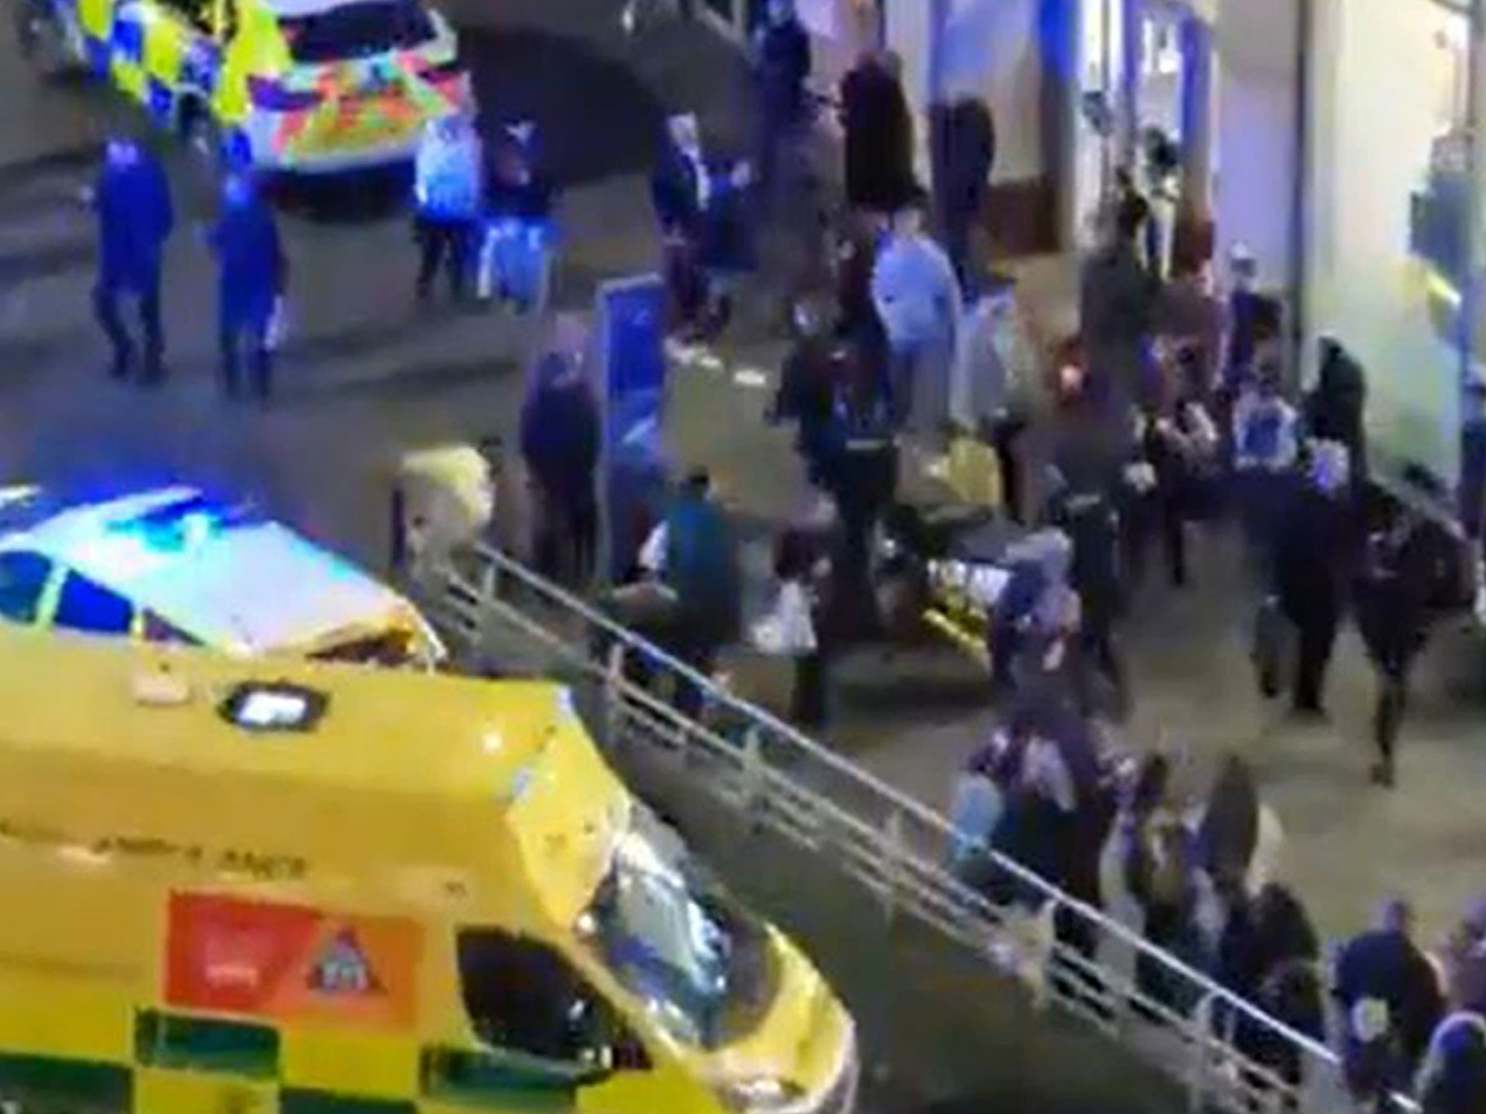 Manchester stabbing: 16-year-old boy knifed repeatedly outside Arndale shopping centre